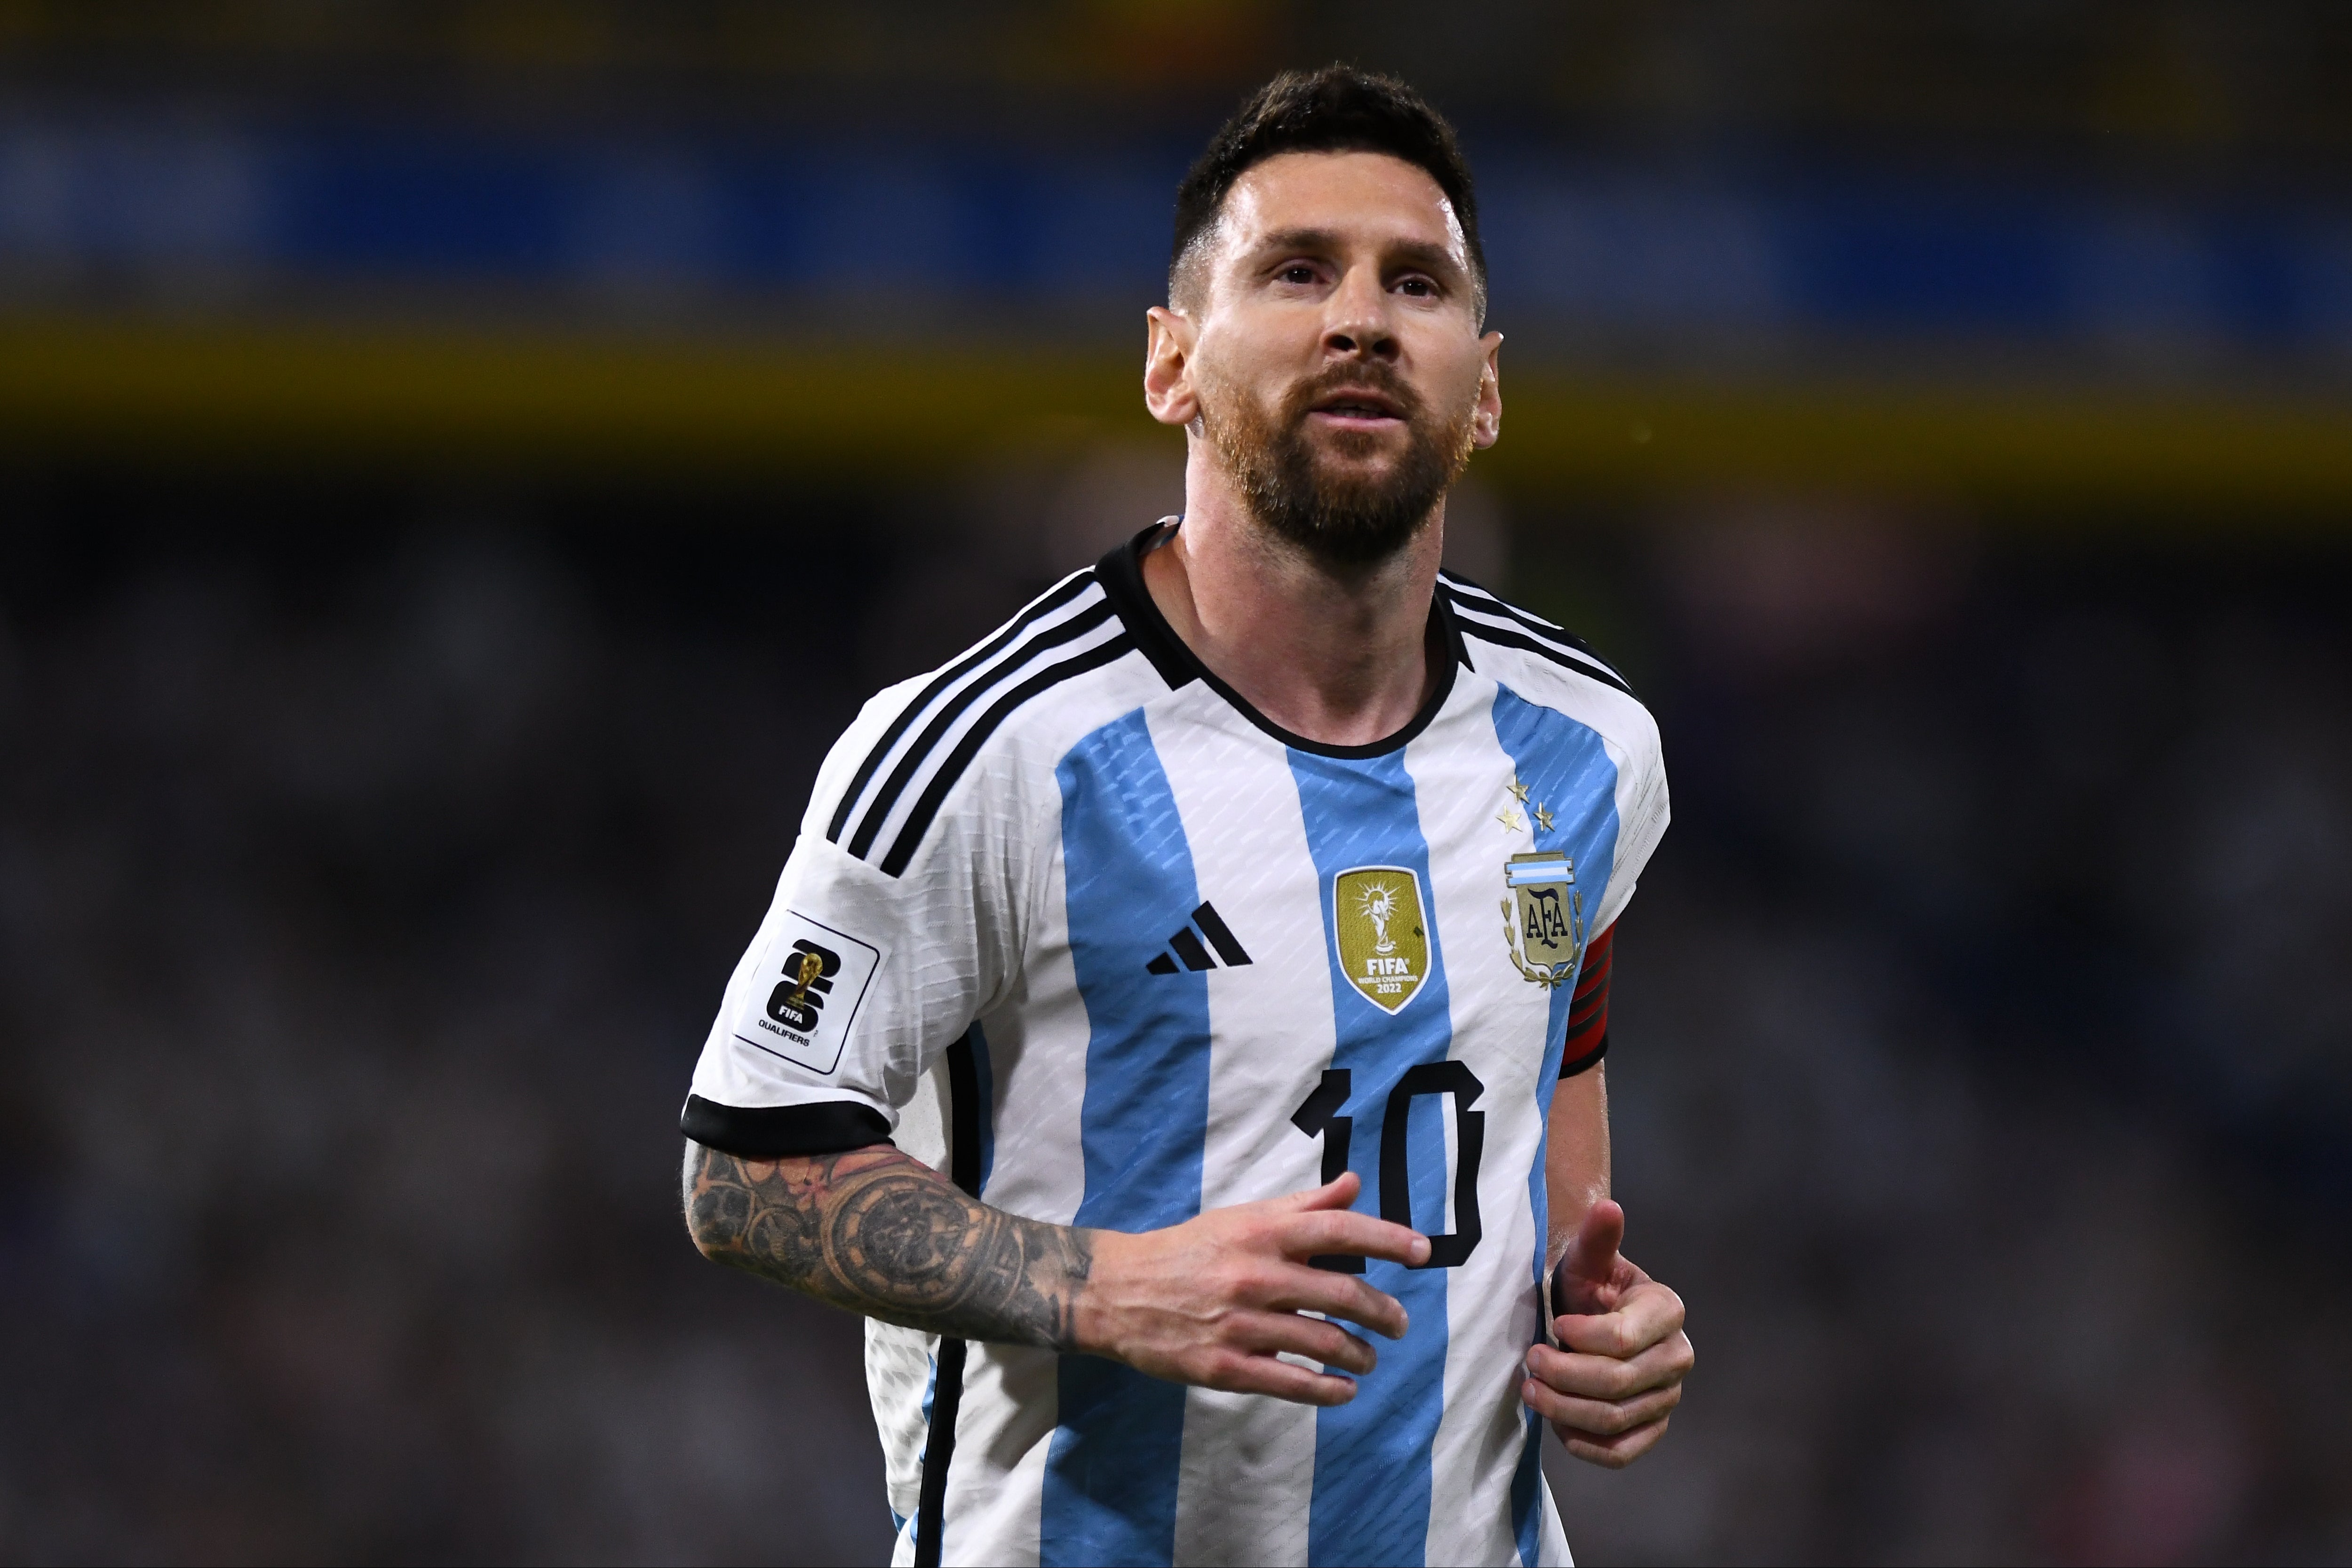 Lionel Messi will hope to secure back-to-back Fifa Best awards